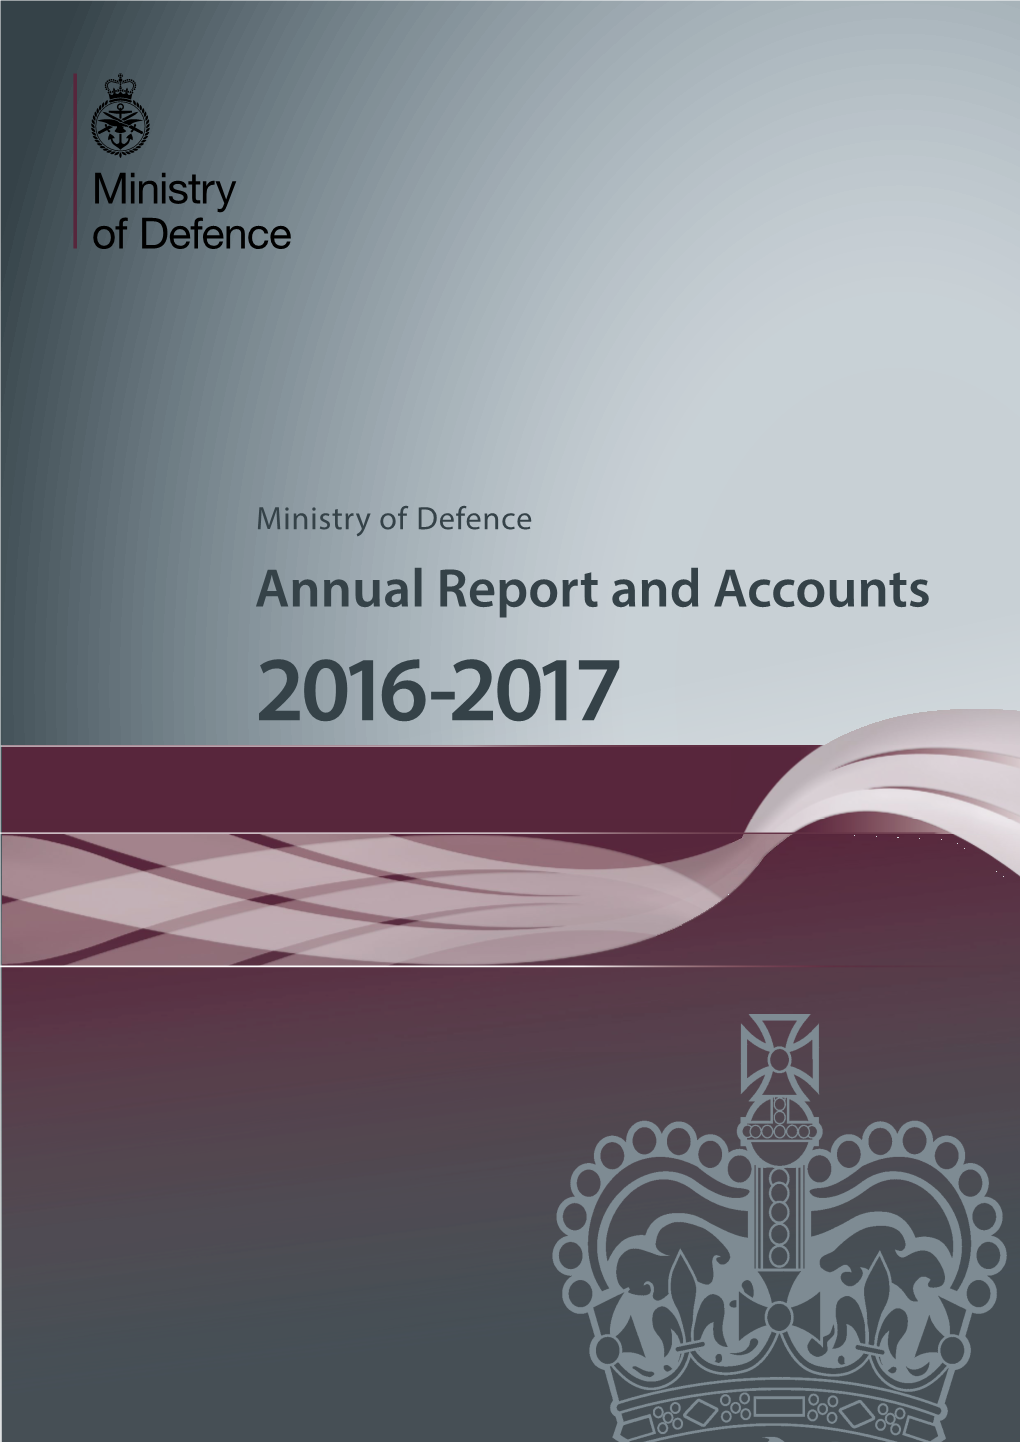 Ministry of Defence Annual Report and Accounts 2016 to 2017 (Print-Ready PDF)